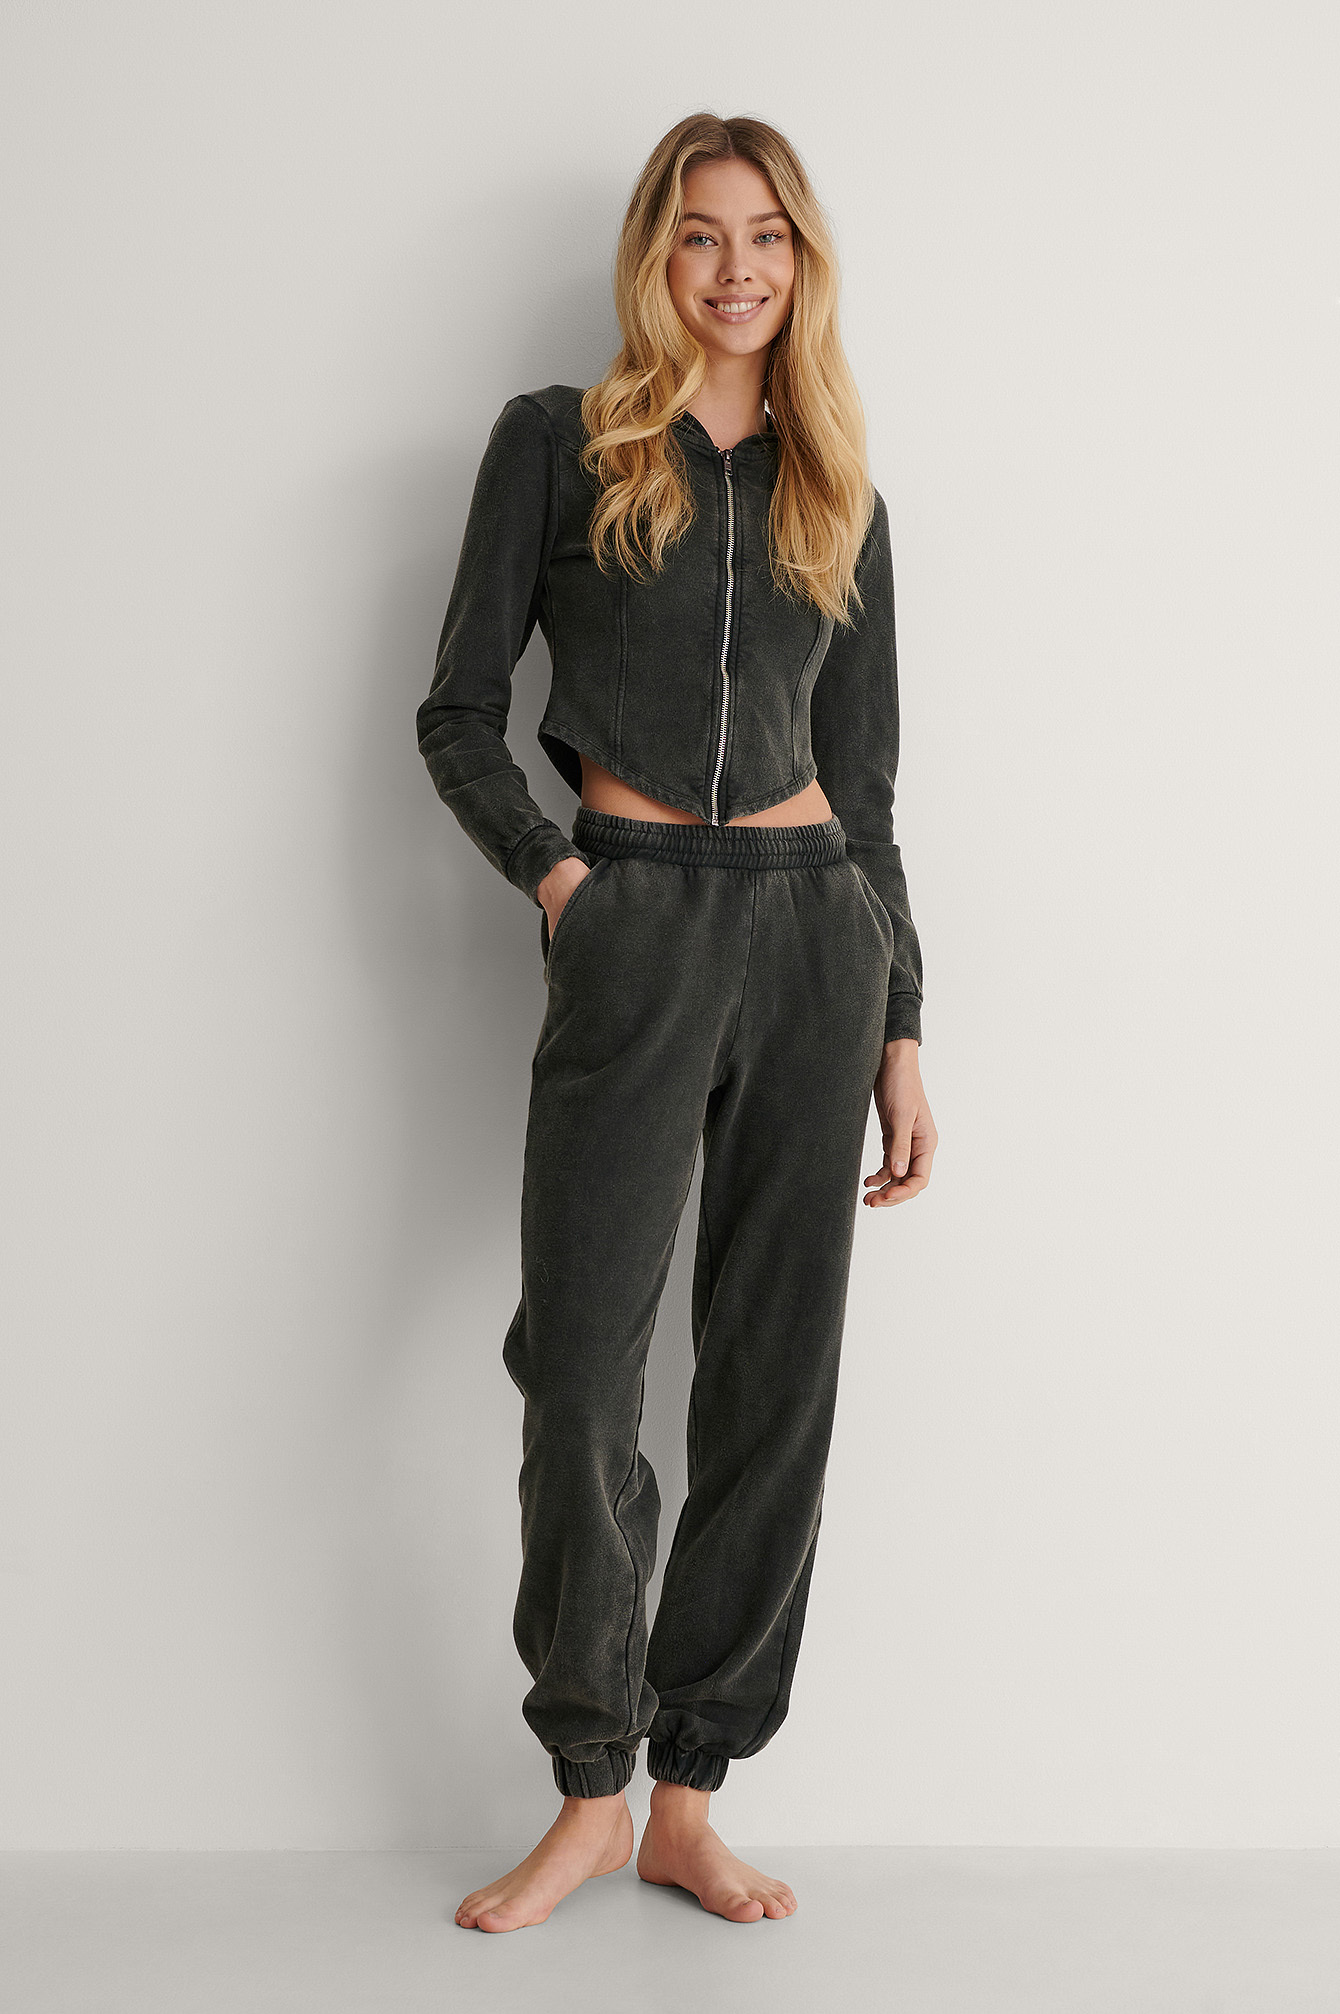 Drawstring Stone Washed Sweatpants Outfit